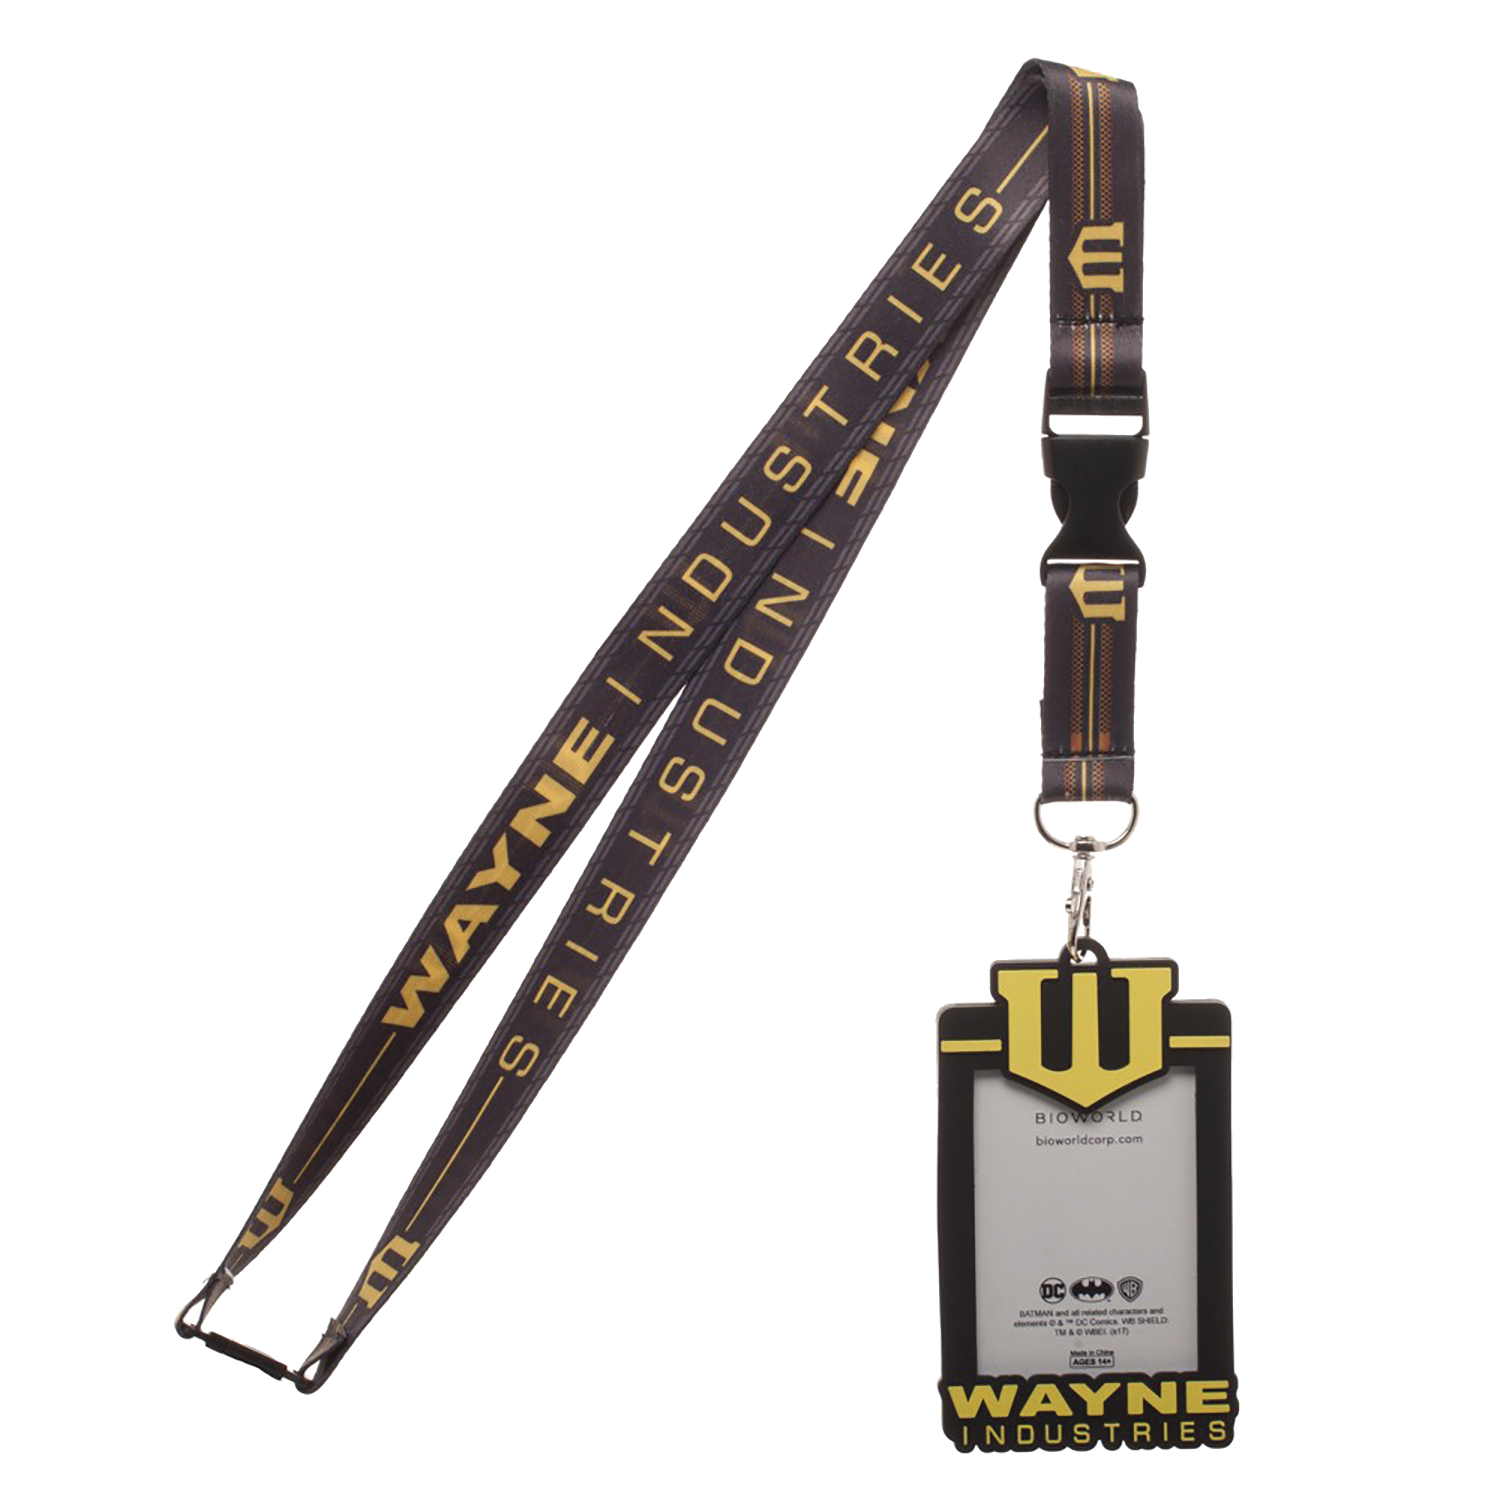 APR188352 - WAYNE INDUSTRIES LANYARD WITH RUBBER ID HOLDER - Previews World